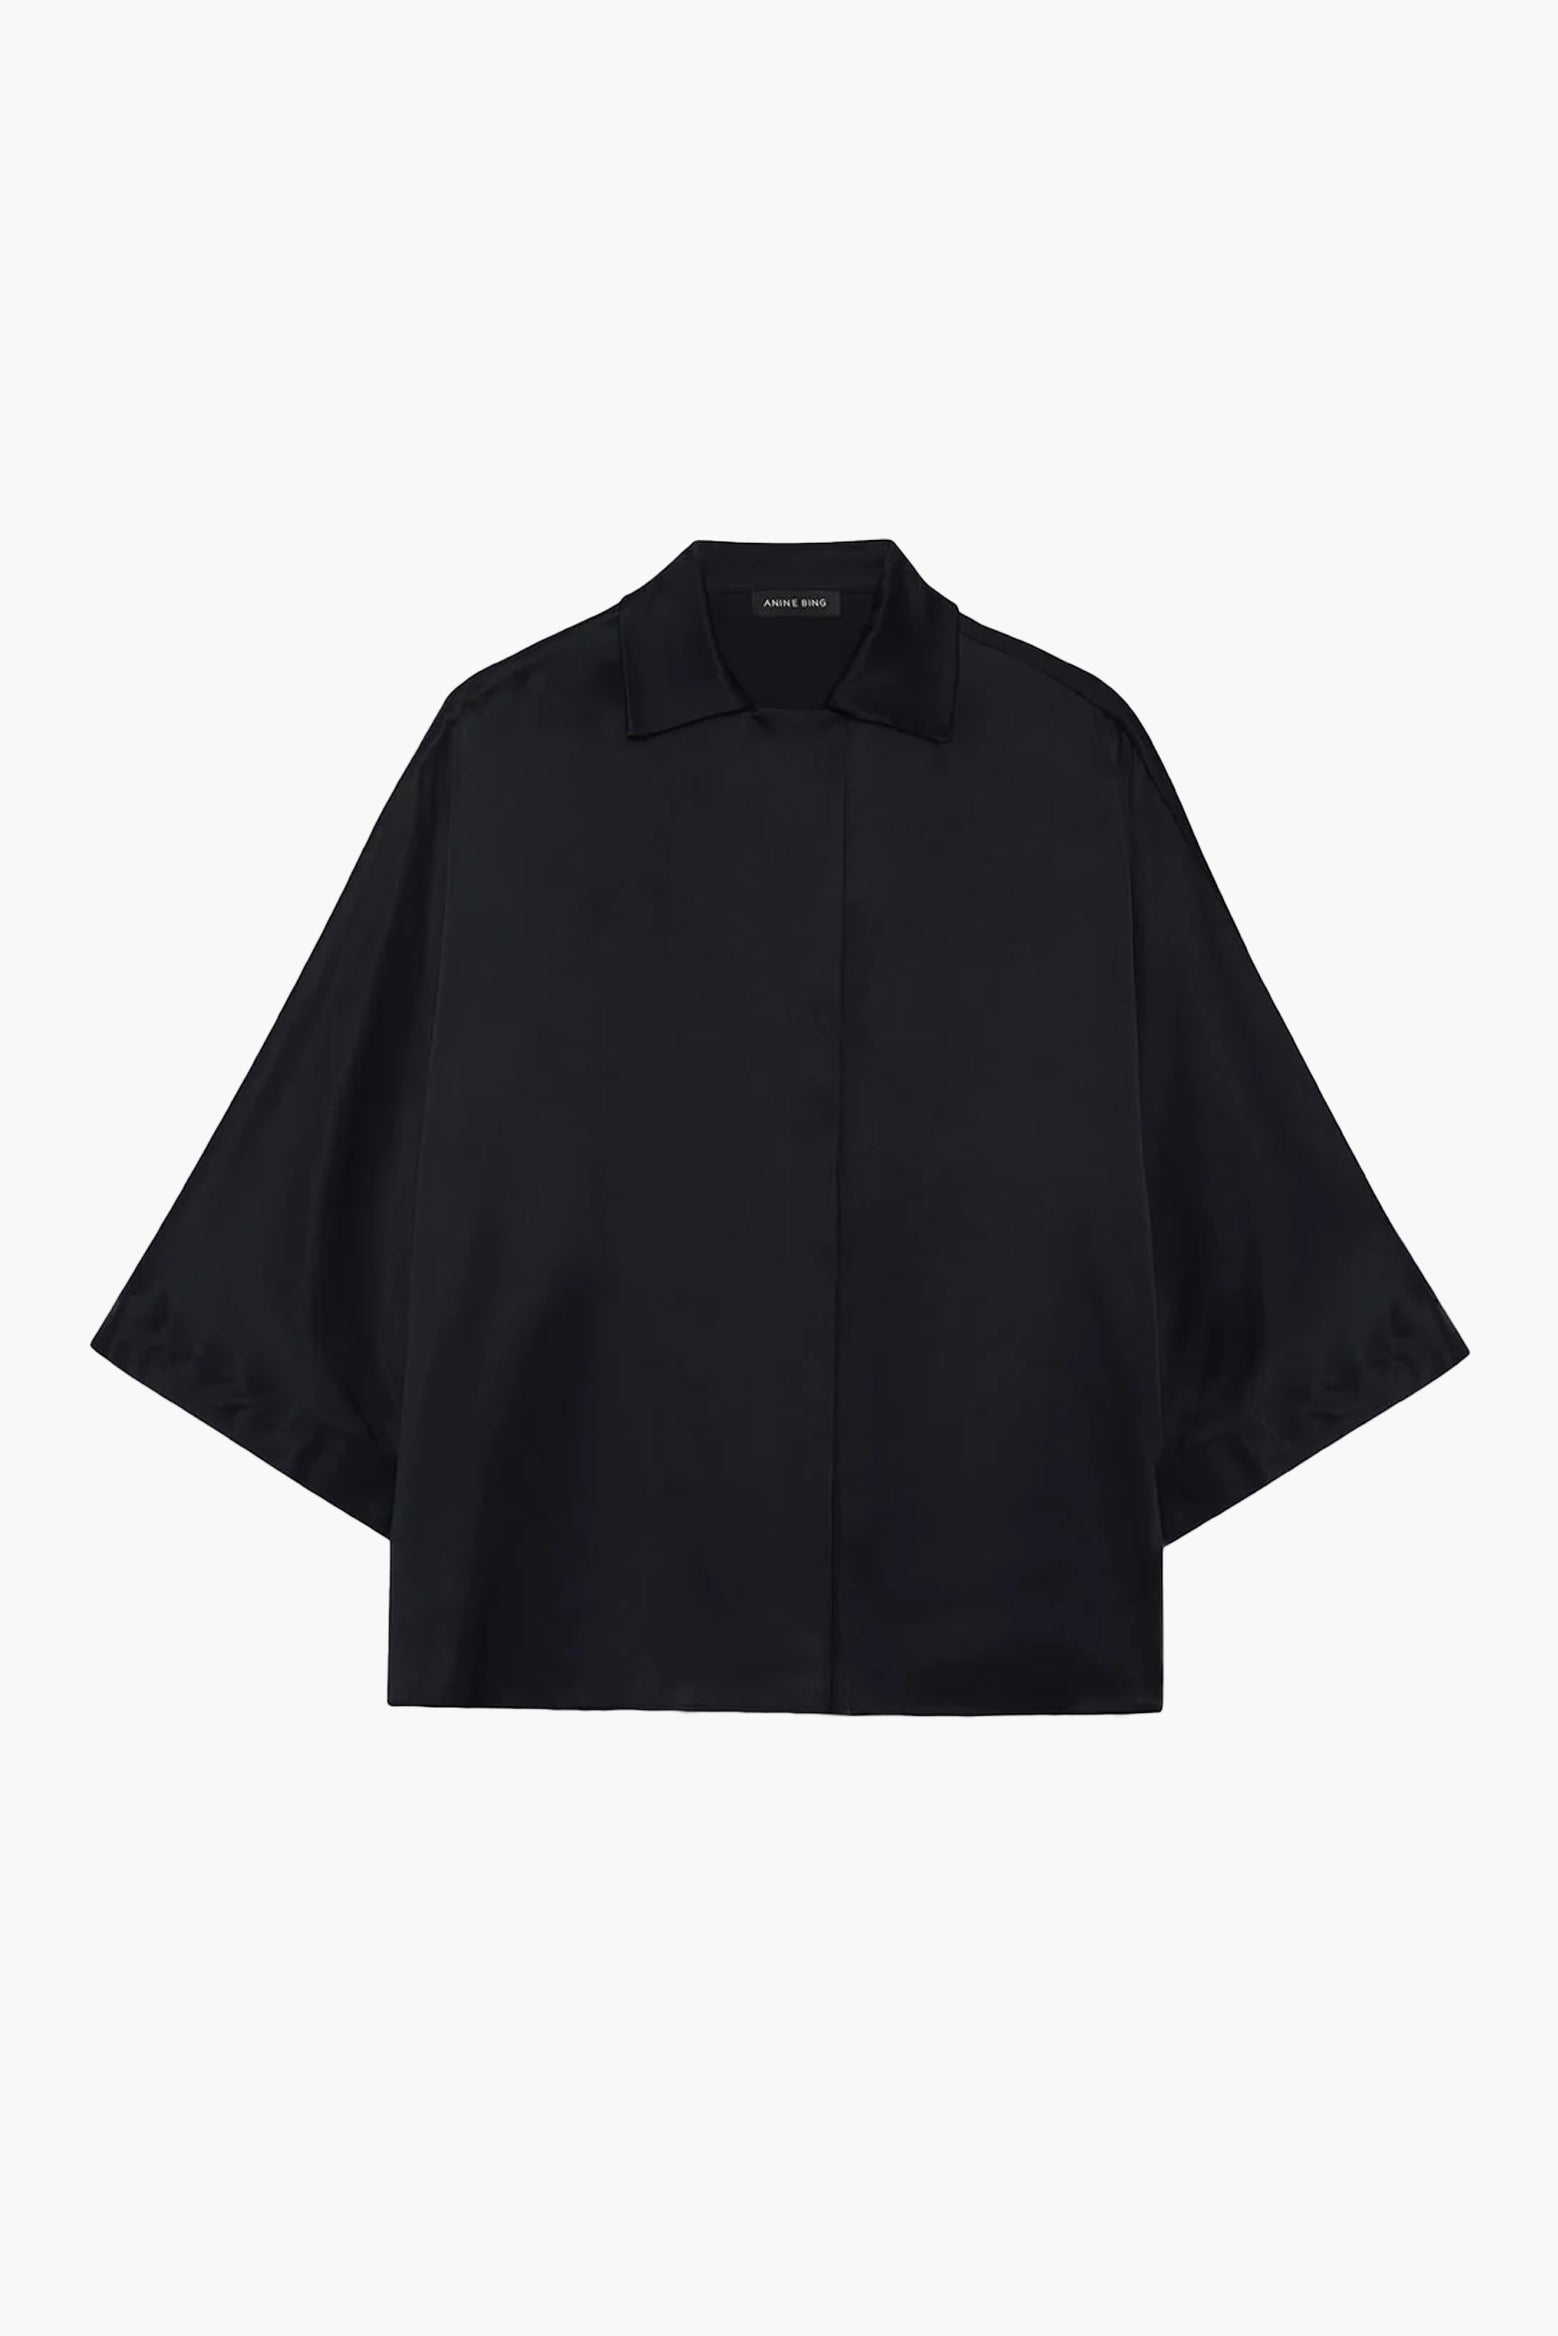 Anine Bing Julia Shirt in Black available at The New Trend Australia. 